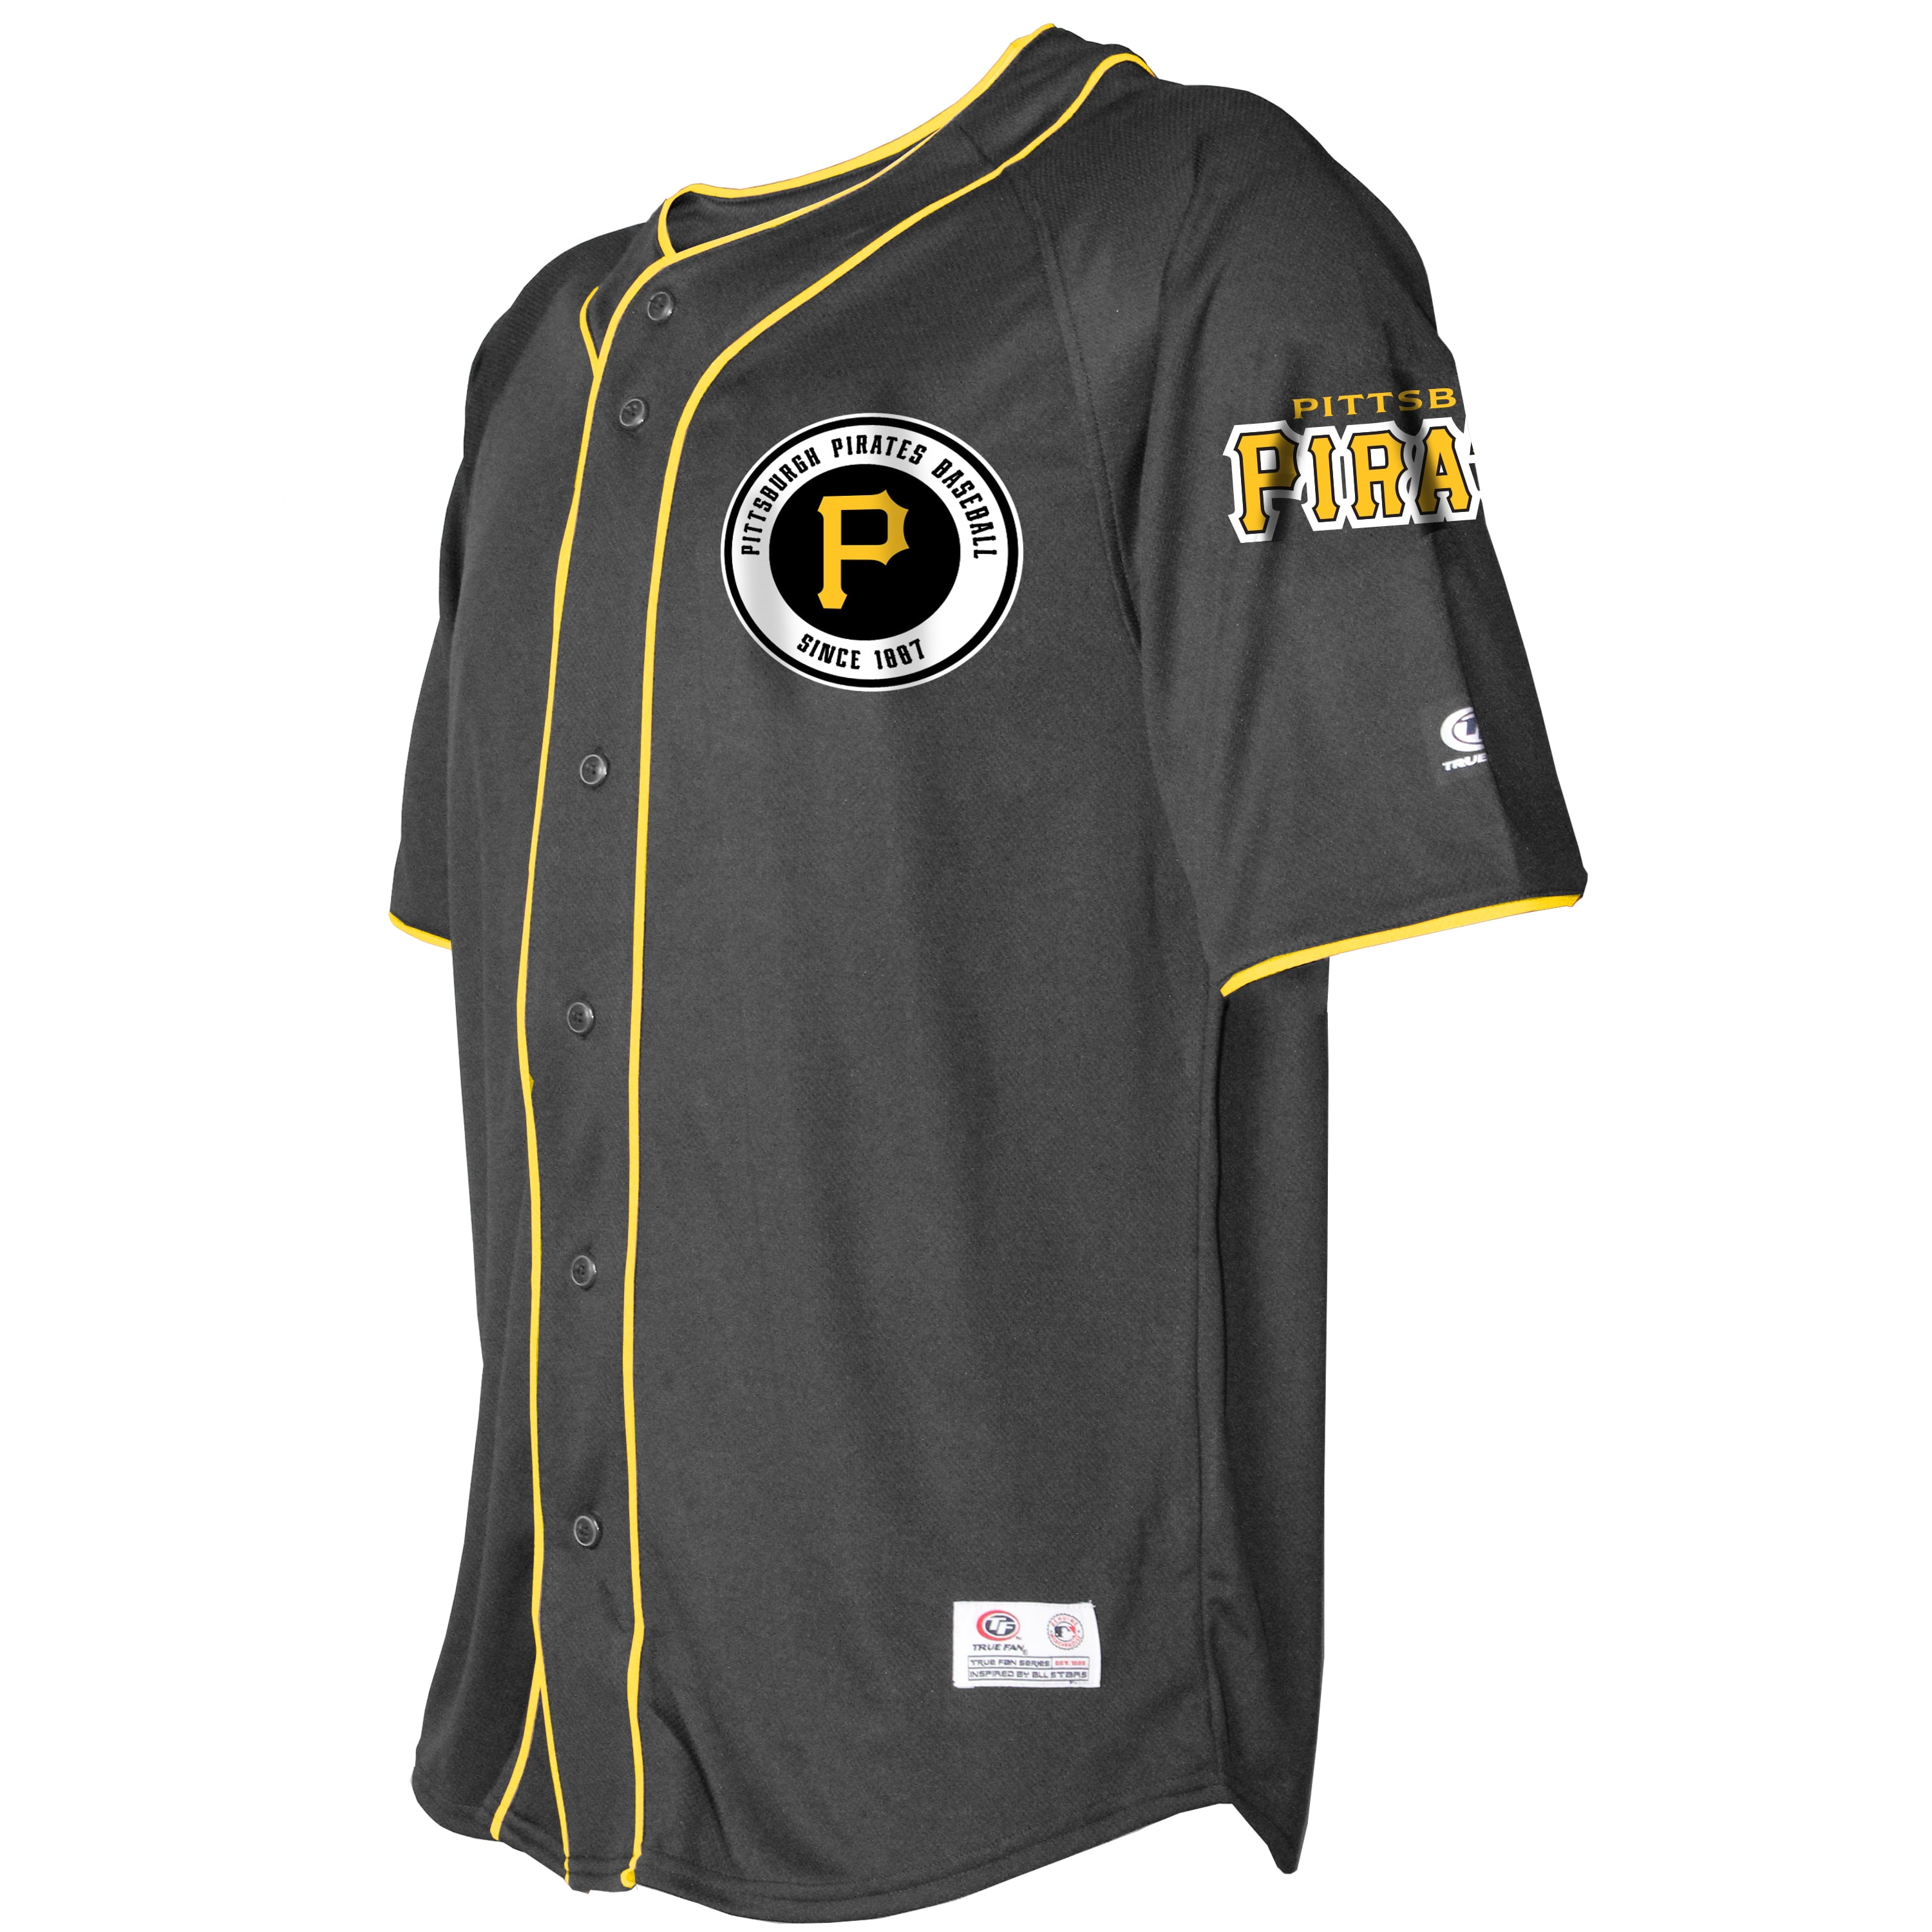 pittsburgh pirates button down jersey